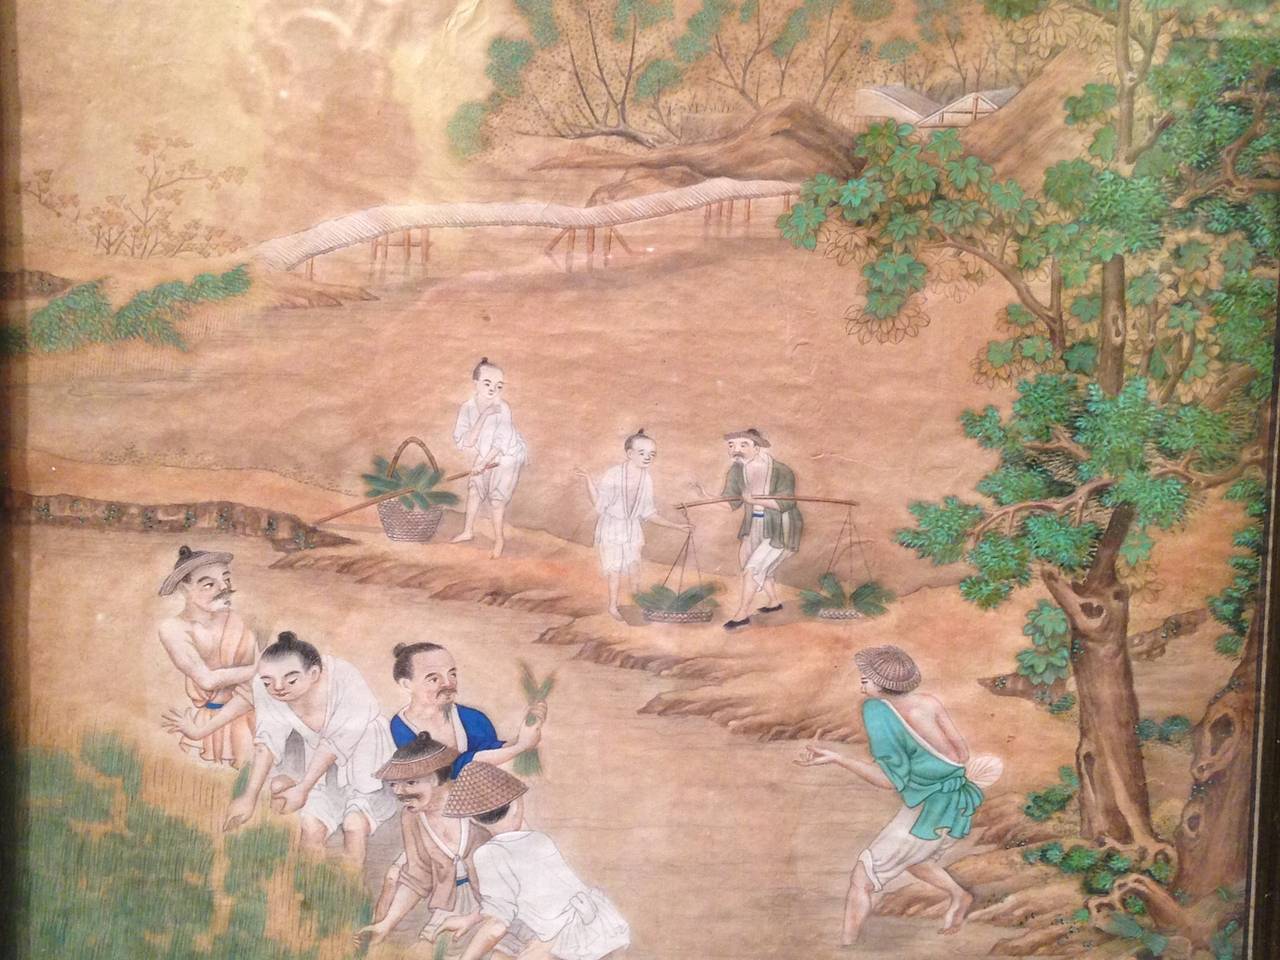 Set of eighteen Chinese paintings on rice paper depicting various aspects of rice production.  Late 18th Century. Painting dimensions: Height: 9 ¼” Width: 9 ¼”